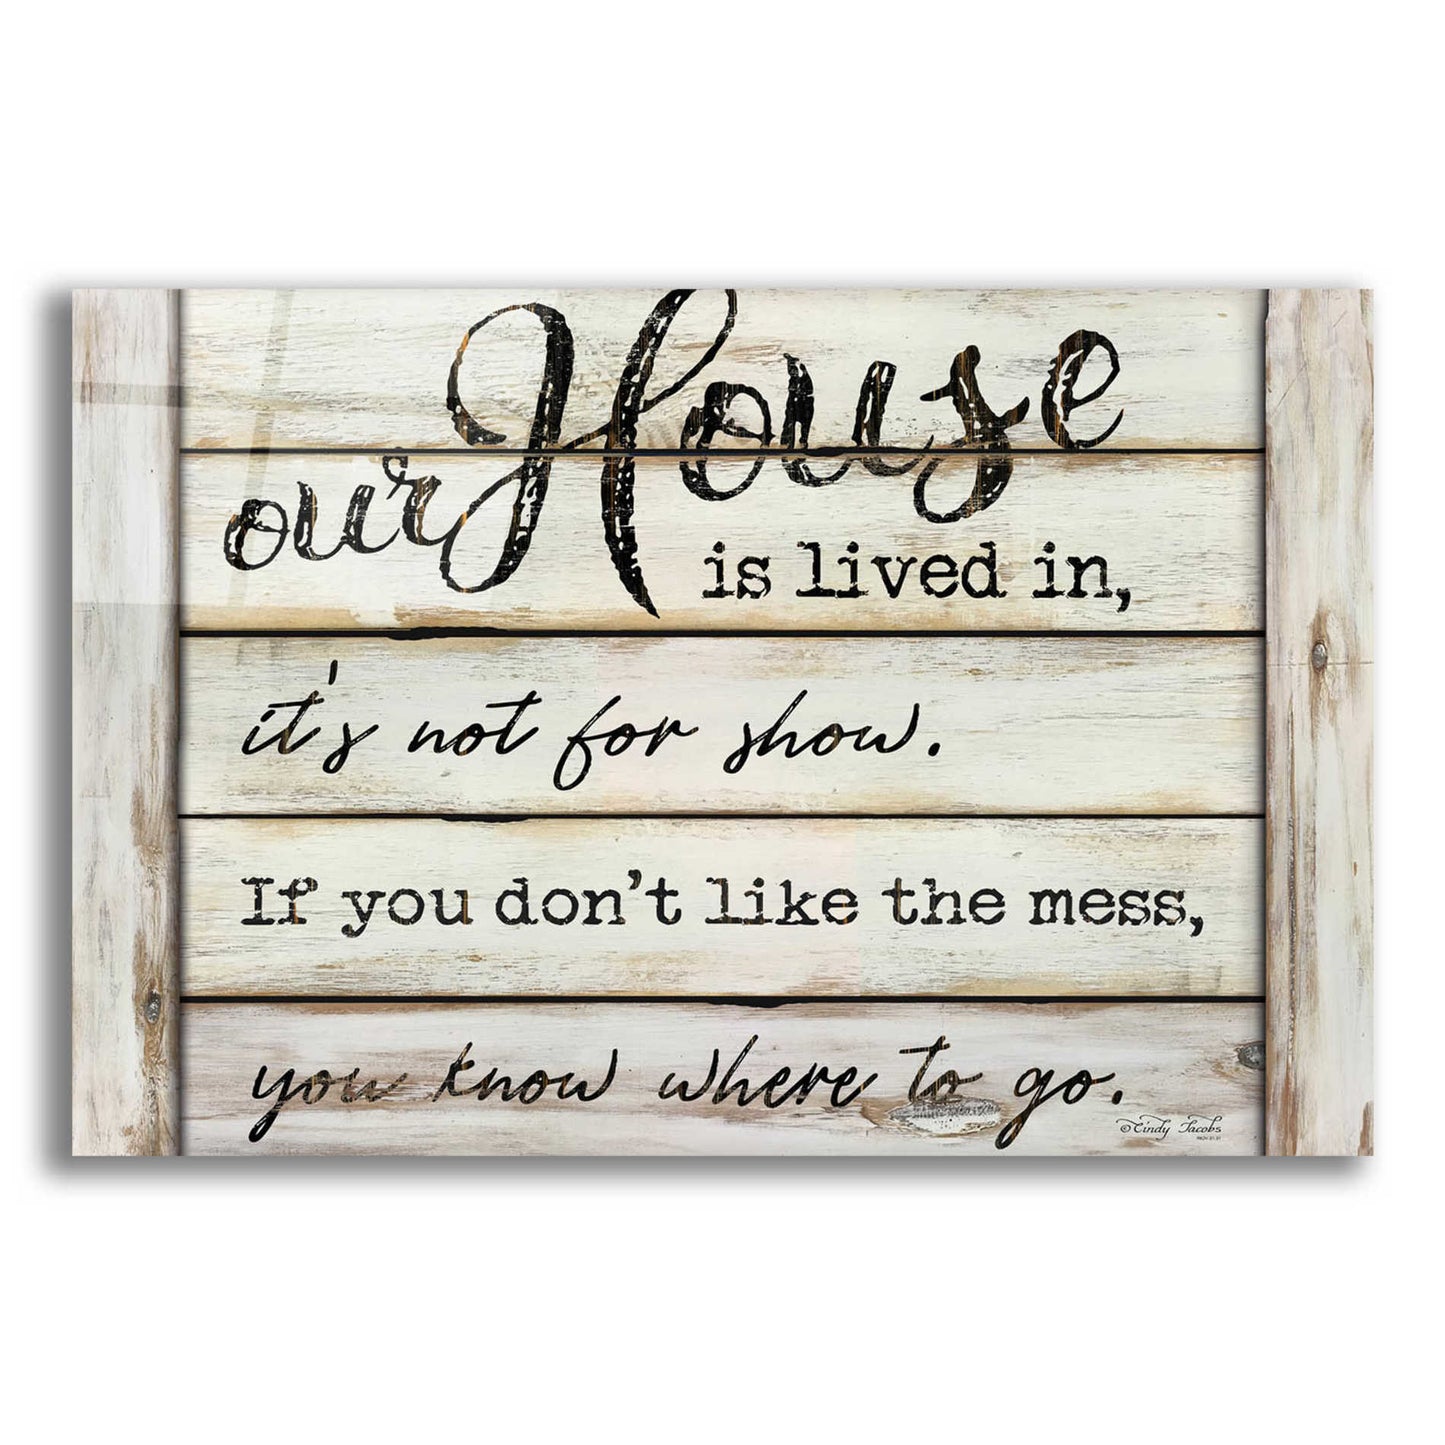 Epic Art 'Our House is Lived In' by Cindy Jacobs, Acrylic Glass Wall Art,24x16